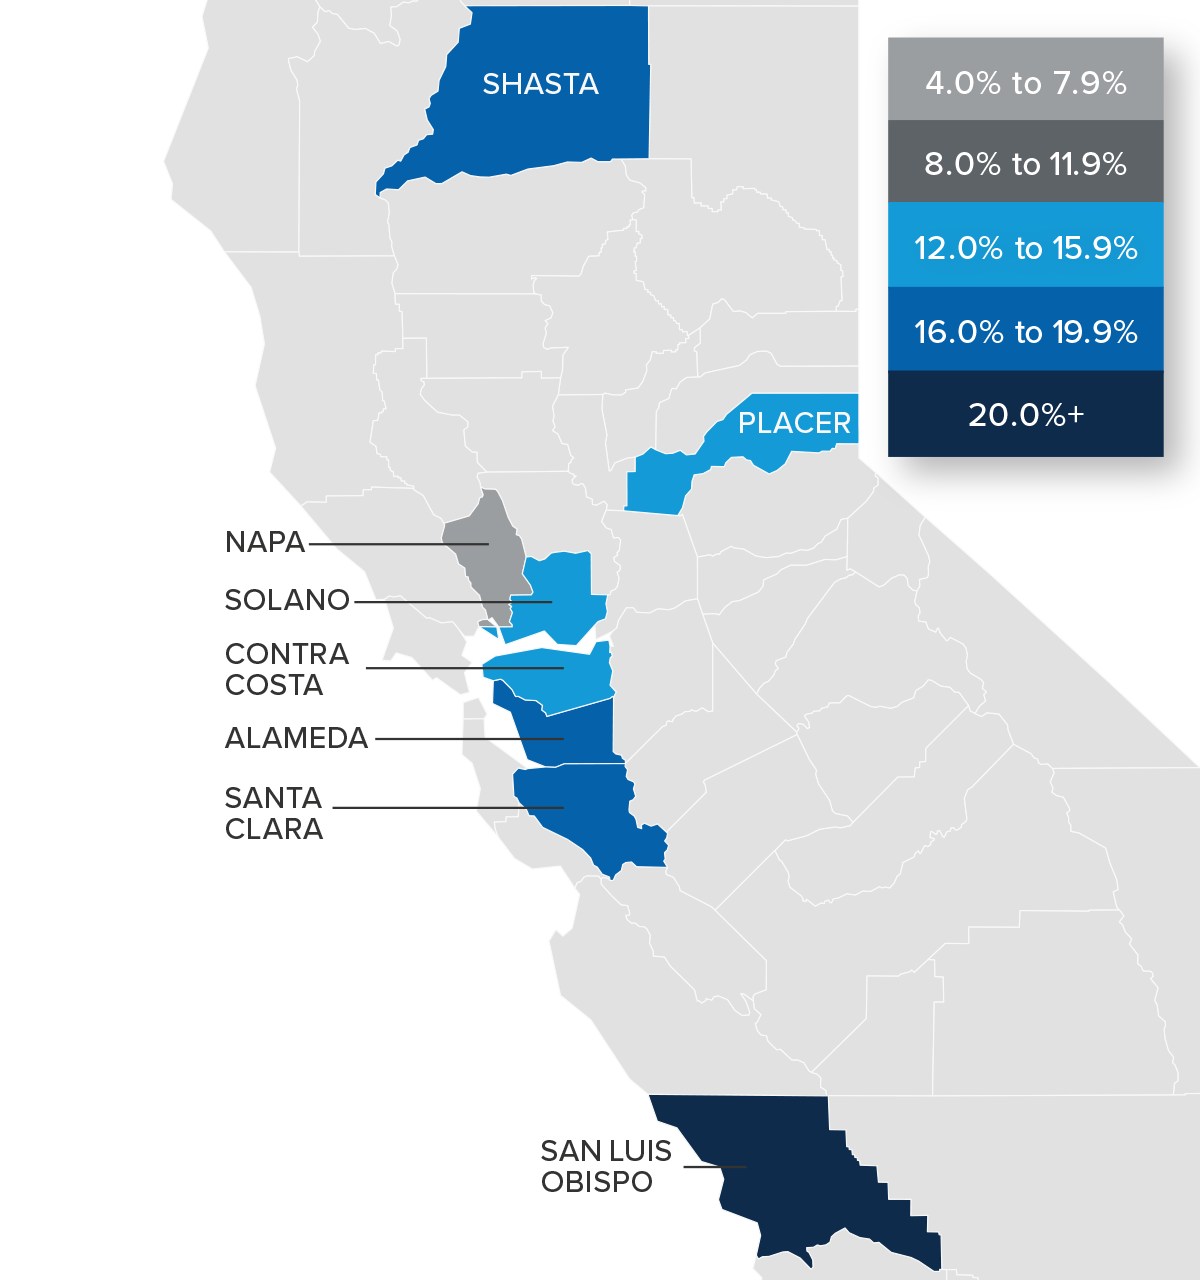 A map showing the year-over-year real estate market percentage changes in various counties in Northern California for Q1 2022.